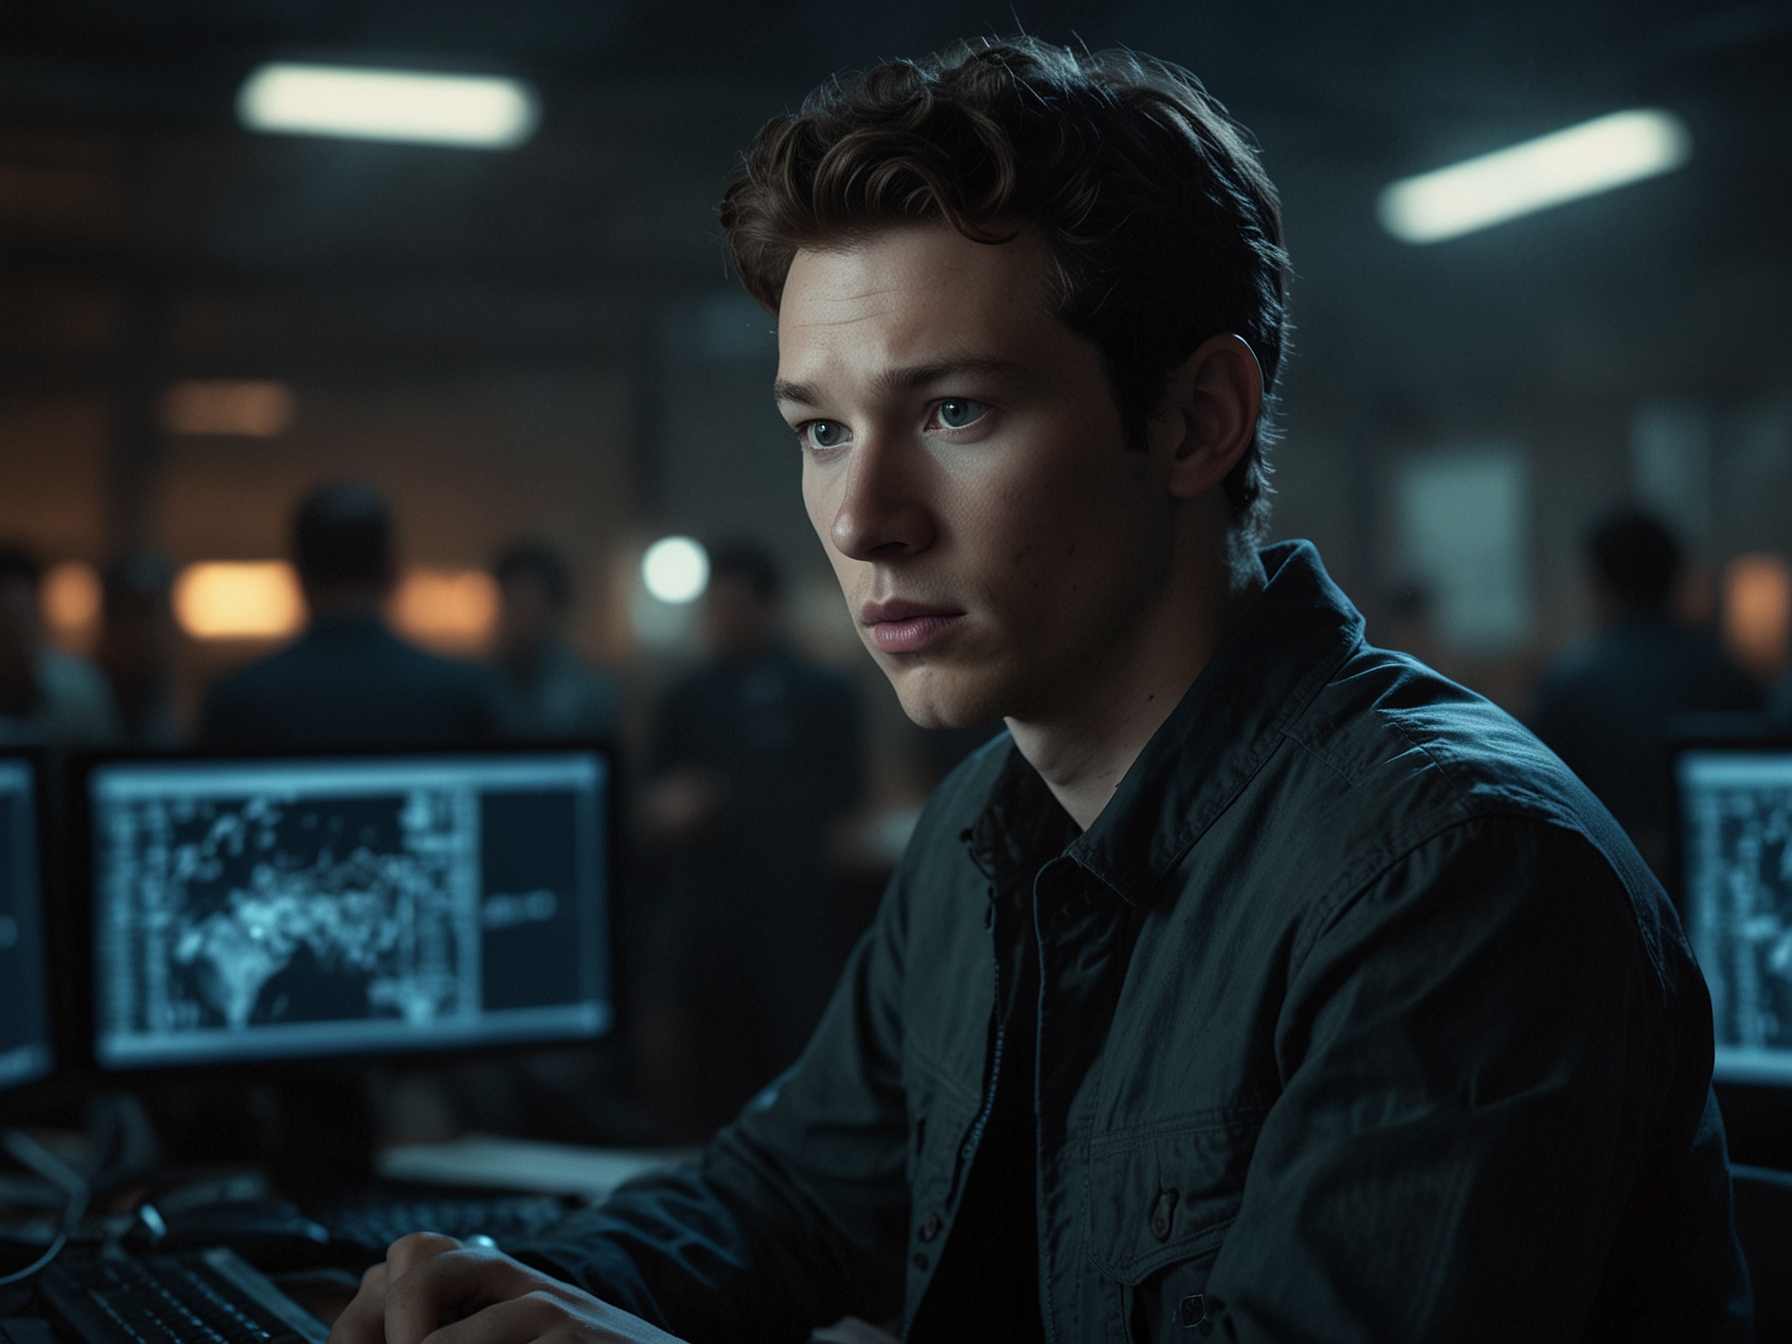 An intense scene featuring Case, portrayed by Callum Turner, navigating cyberspace with a determined expression. This showcases the character's return to hacking in the dystopian future depicted in the series.